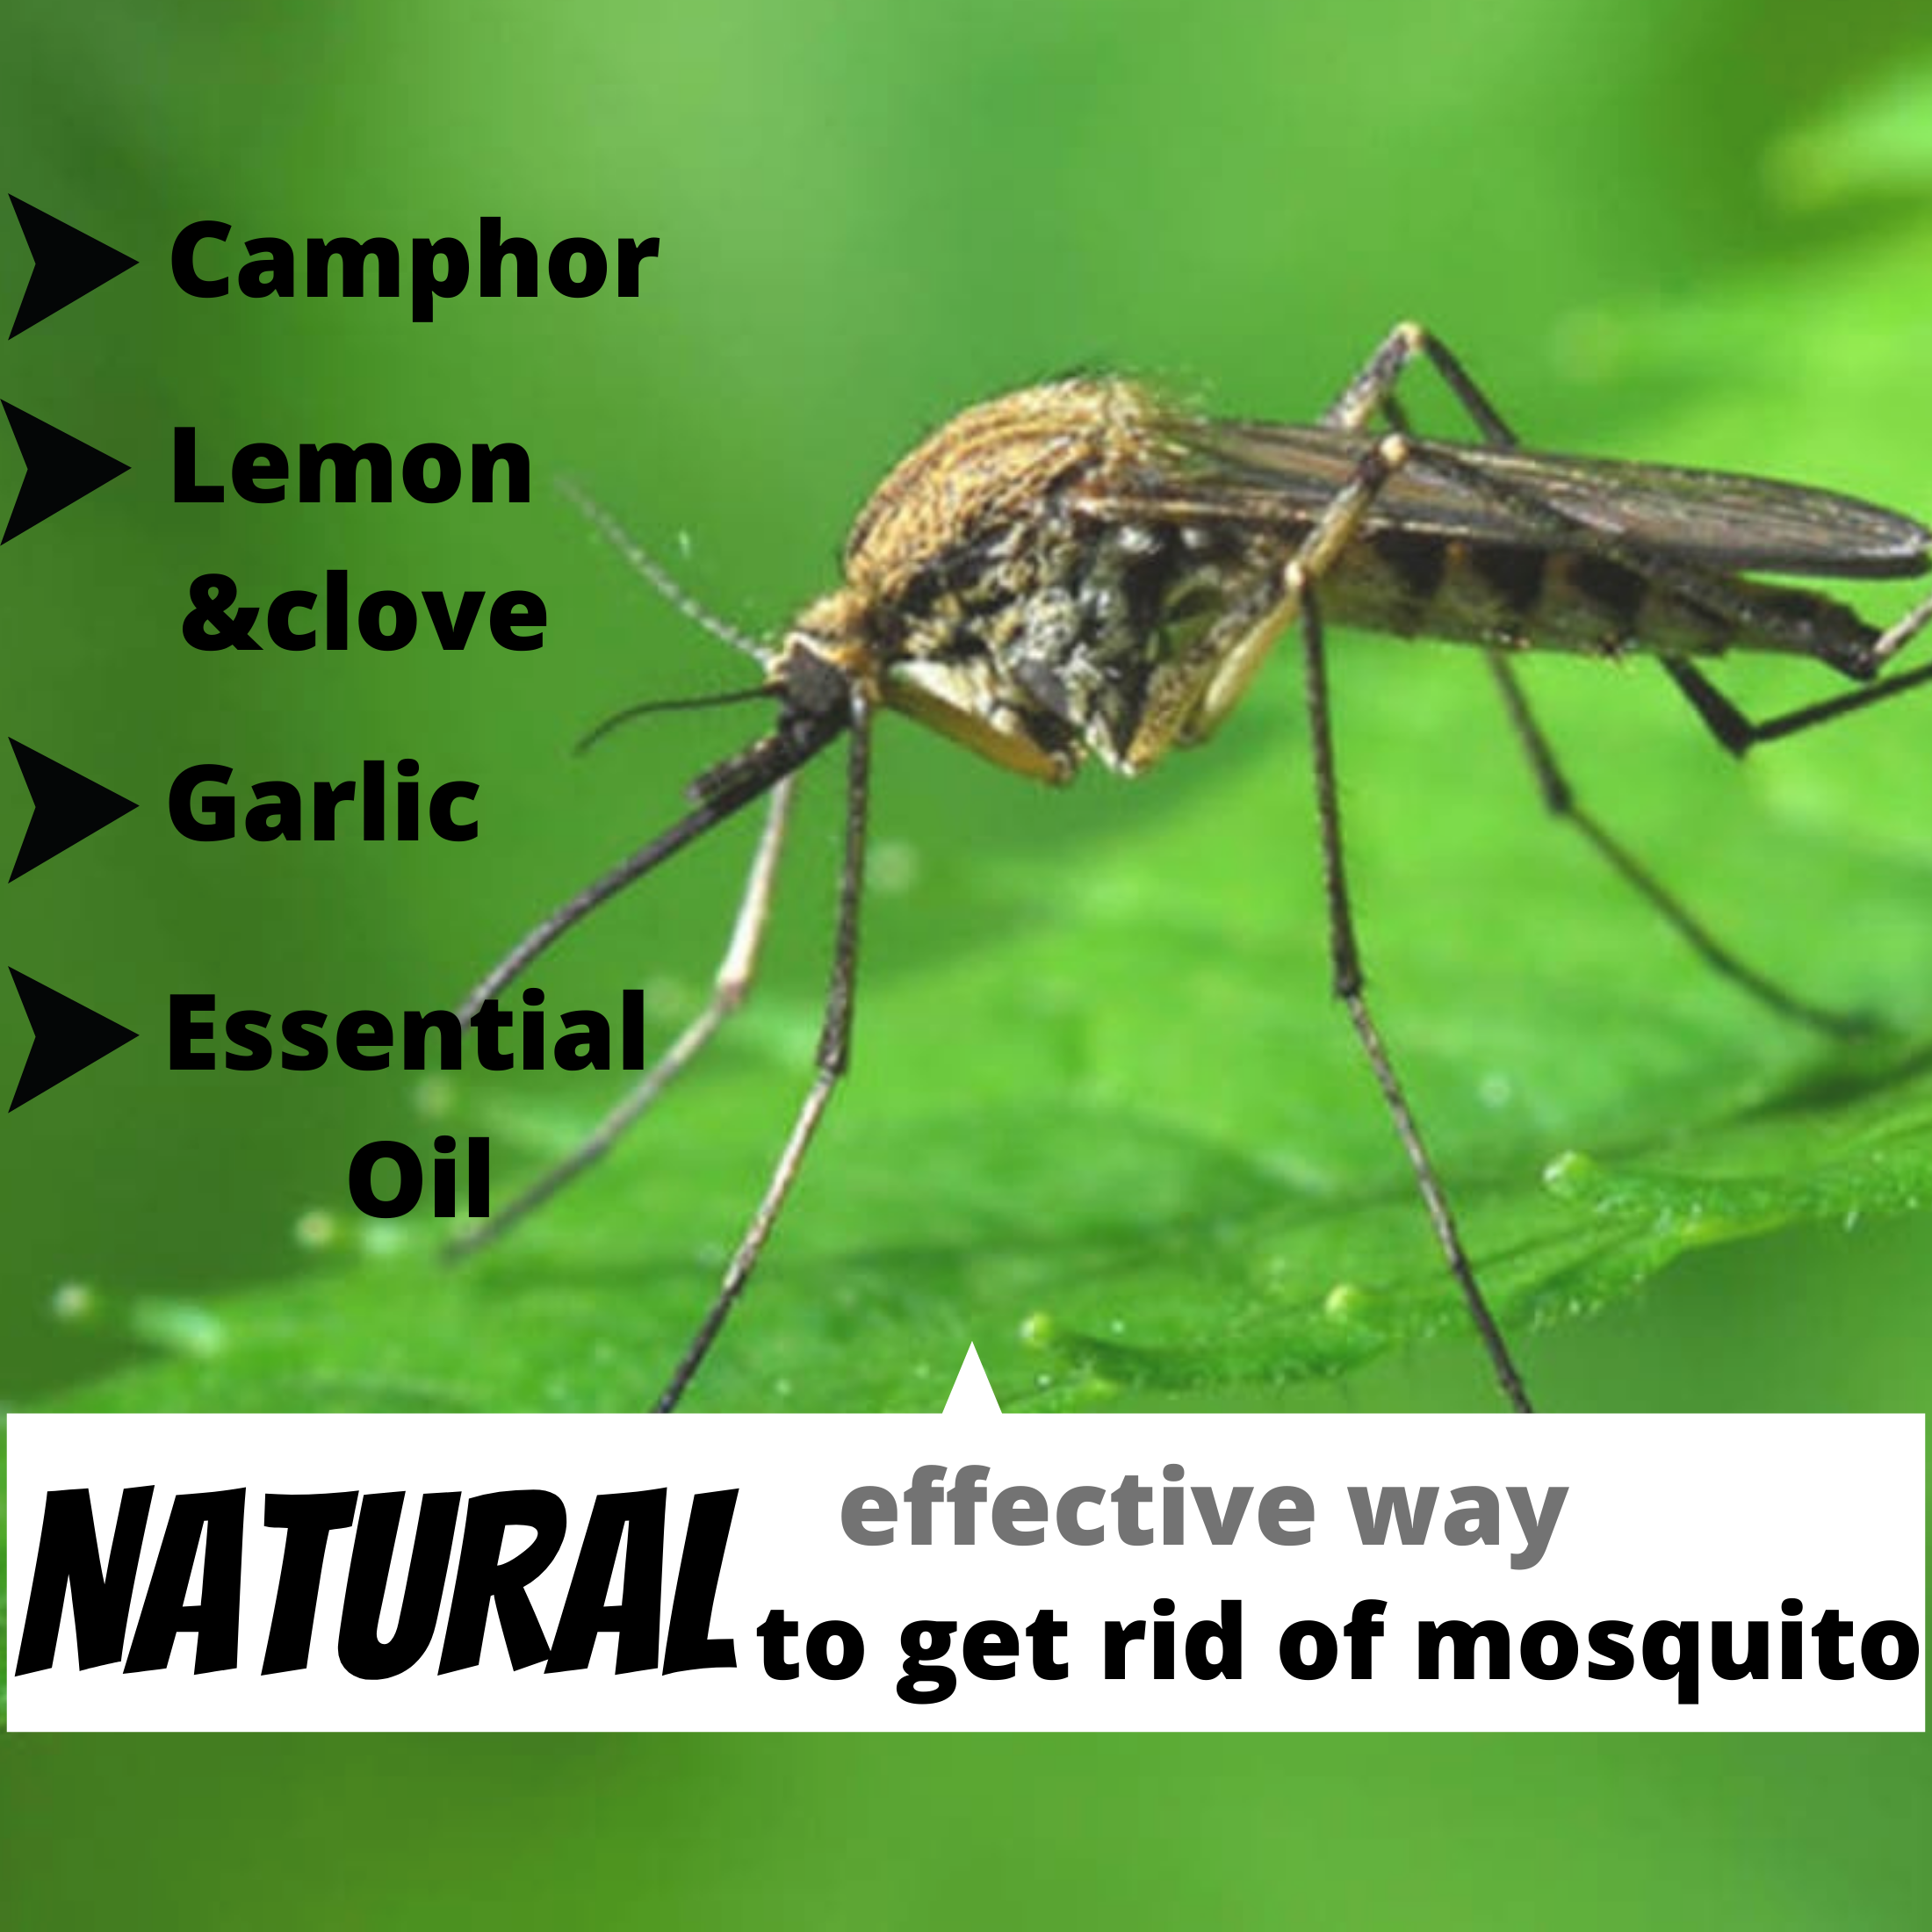 How to get rid of mosquitoes naturally?